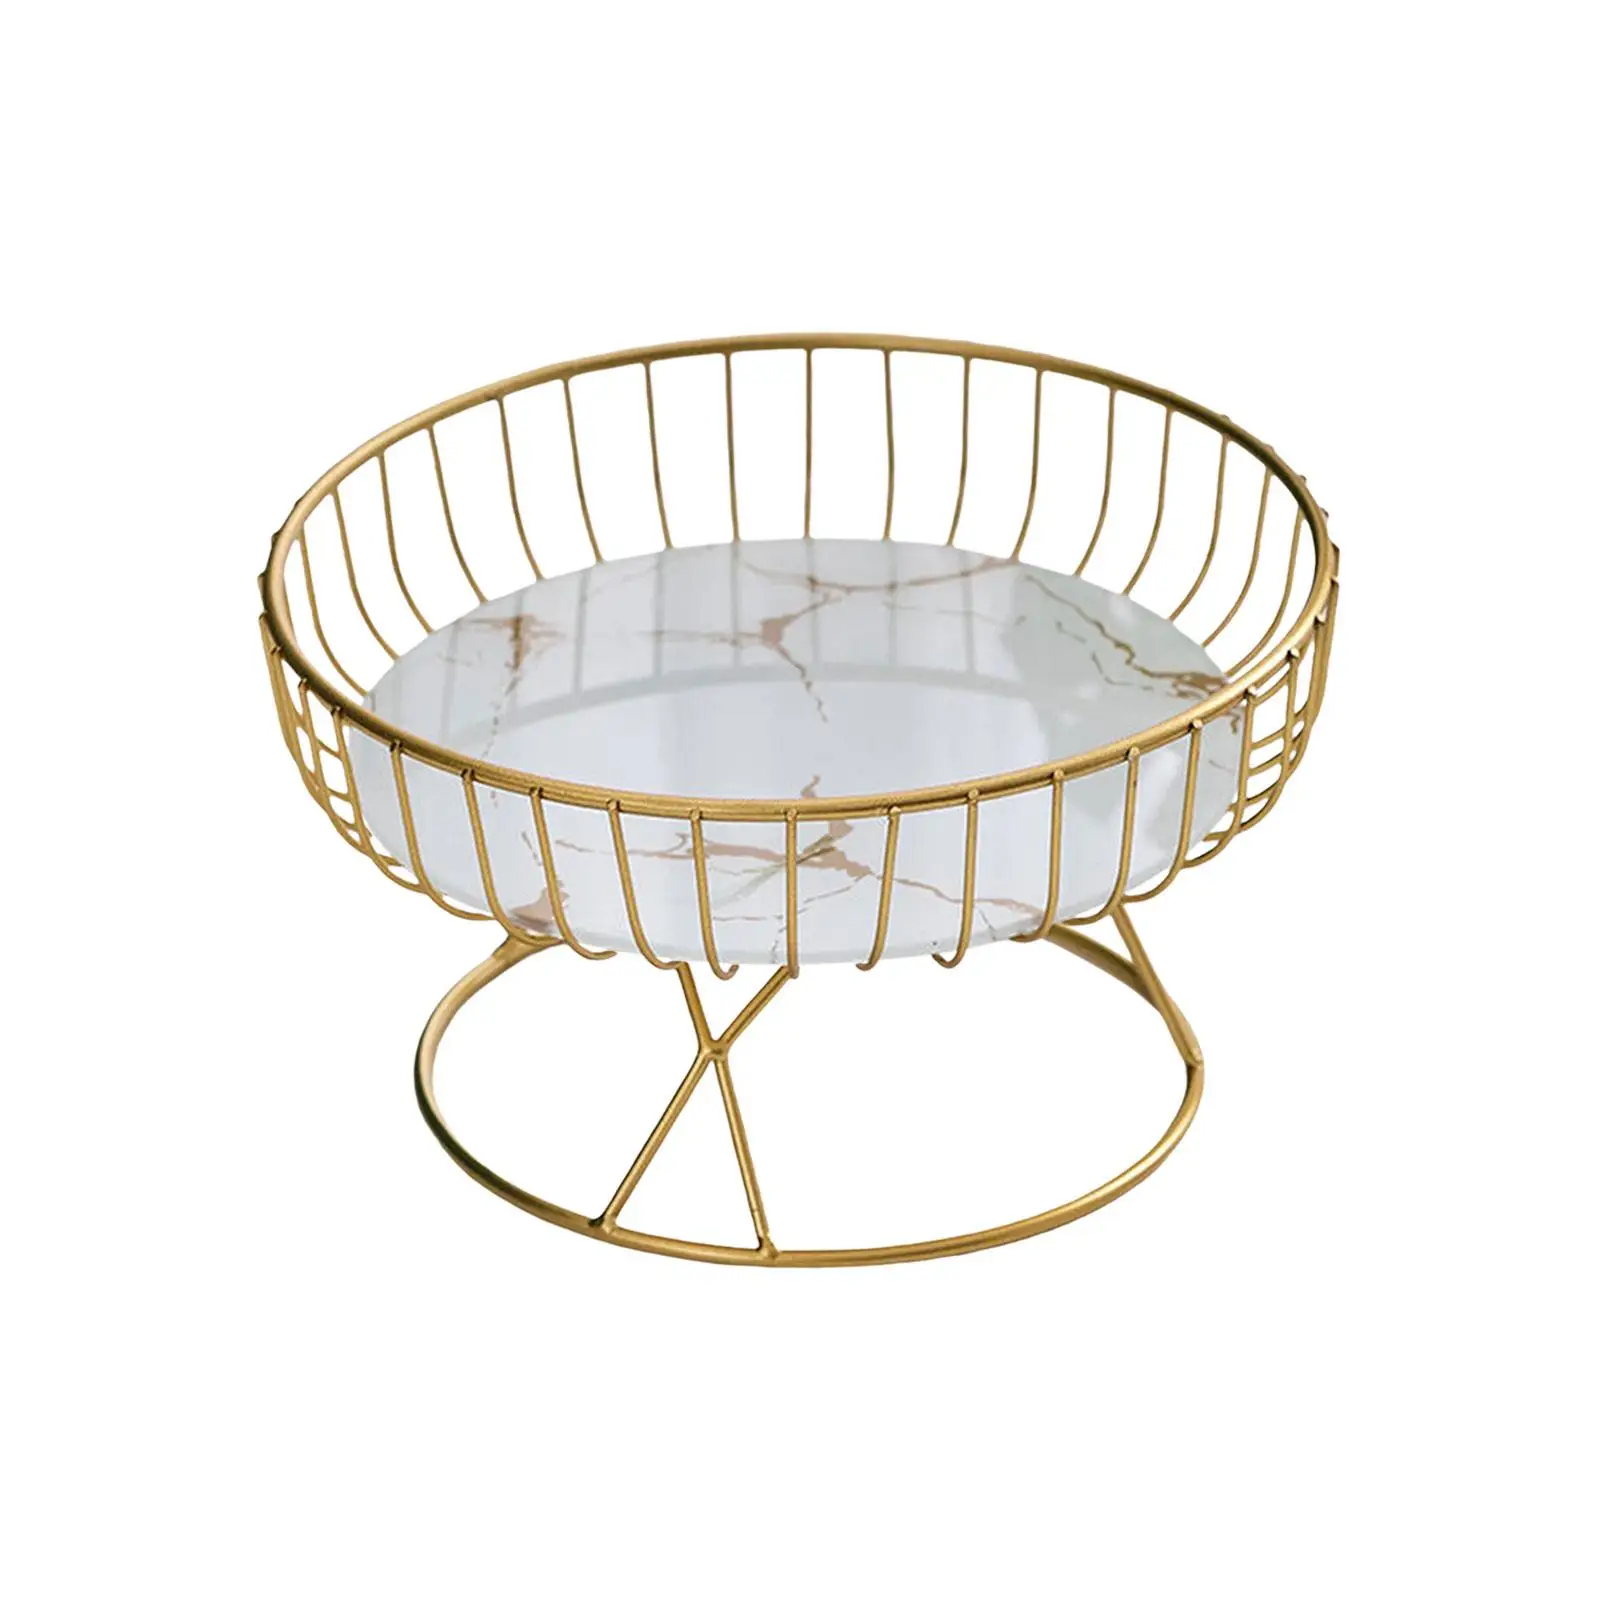 Metal Iron Wire Fruit Bowl Vegetable Stand Holder Container Fruit Basket for Living Room Dining Table Tea Bar Household Garden